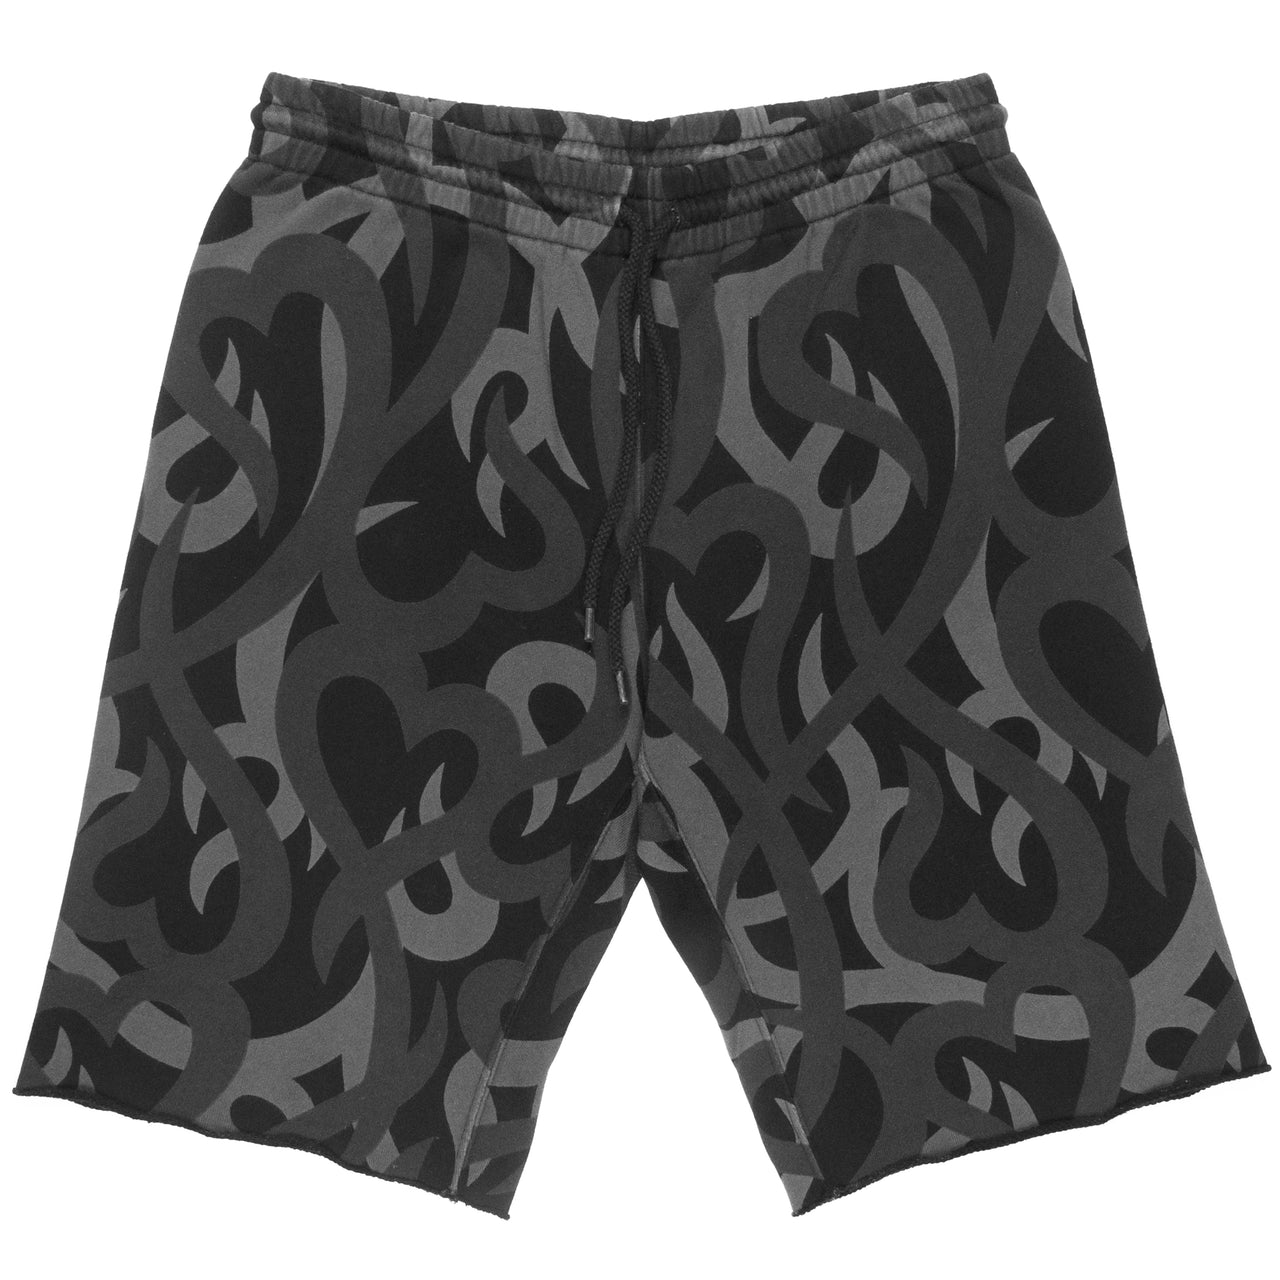 Number (N)ine Tribal Heart Camo Shorts - AW04 "Give Peace a Chance"